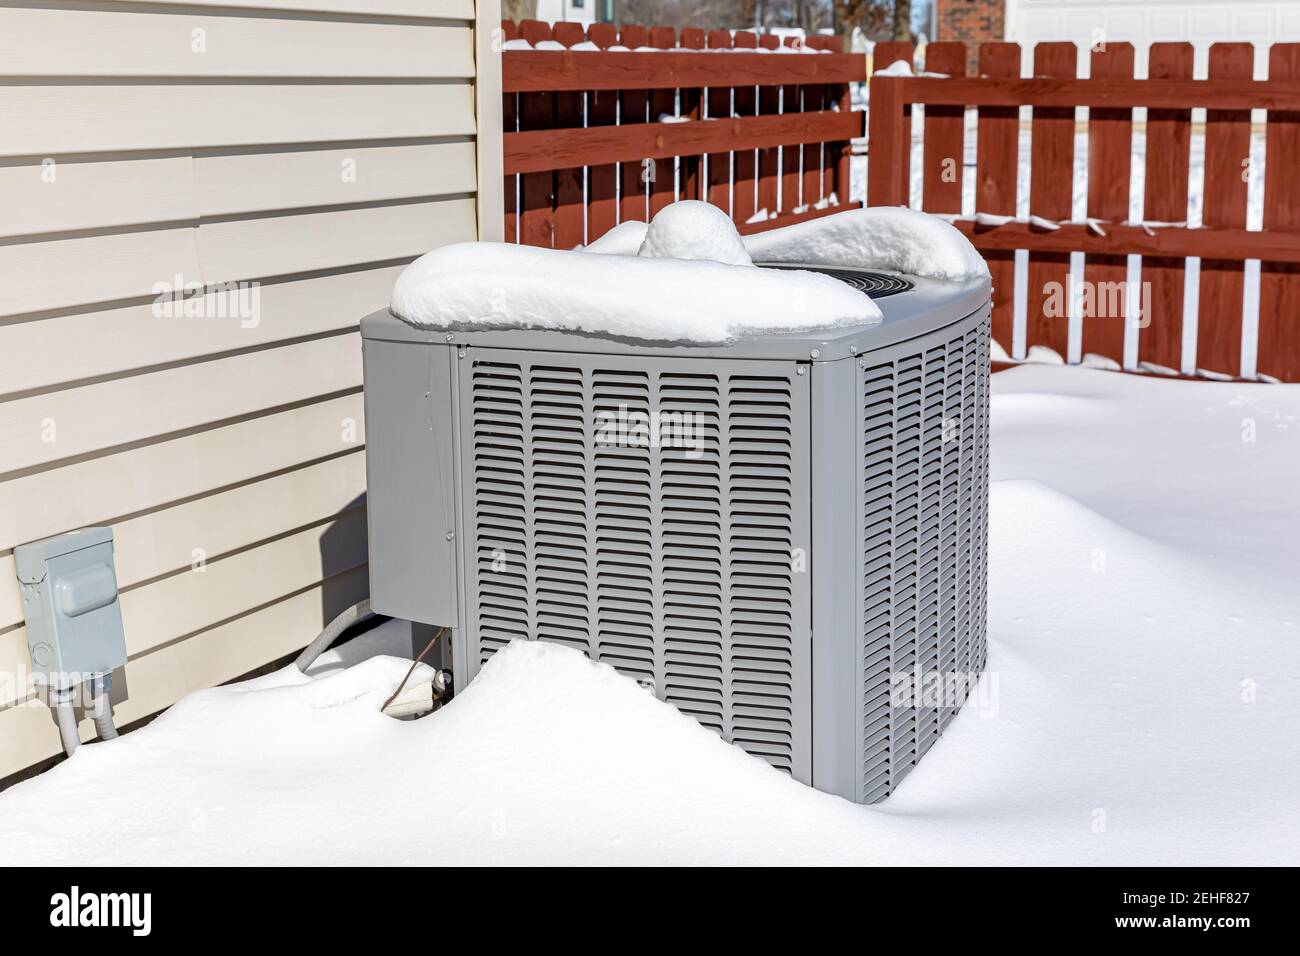 House air conditioning unit covered in snow during winter. Concept of home air conditioning, hvac, repair, service, winterize and maintenance. Stock Photo